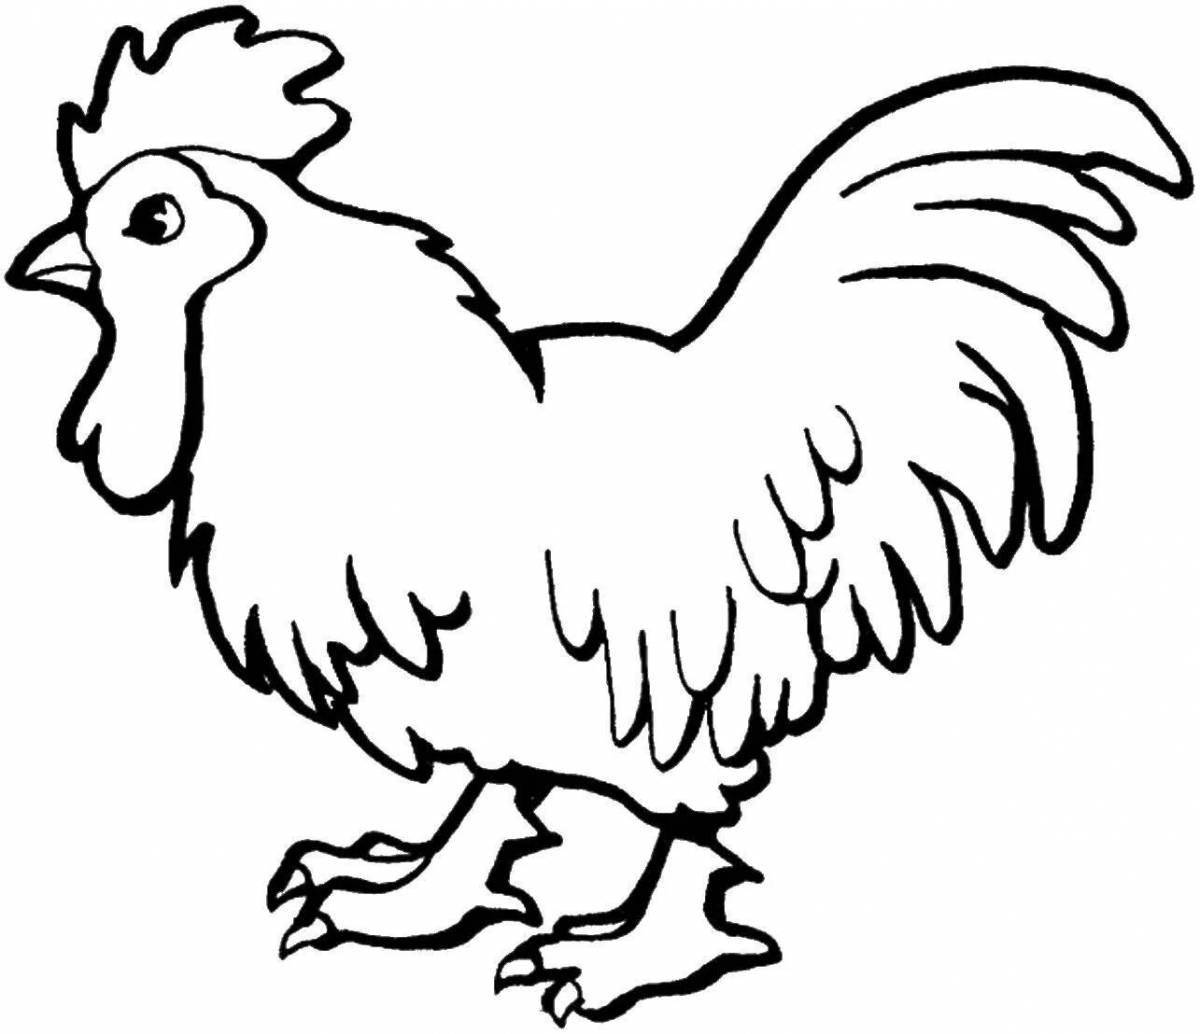 Amusing rooster coloring for kids